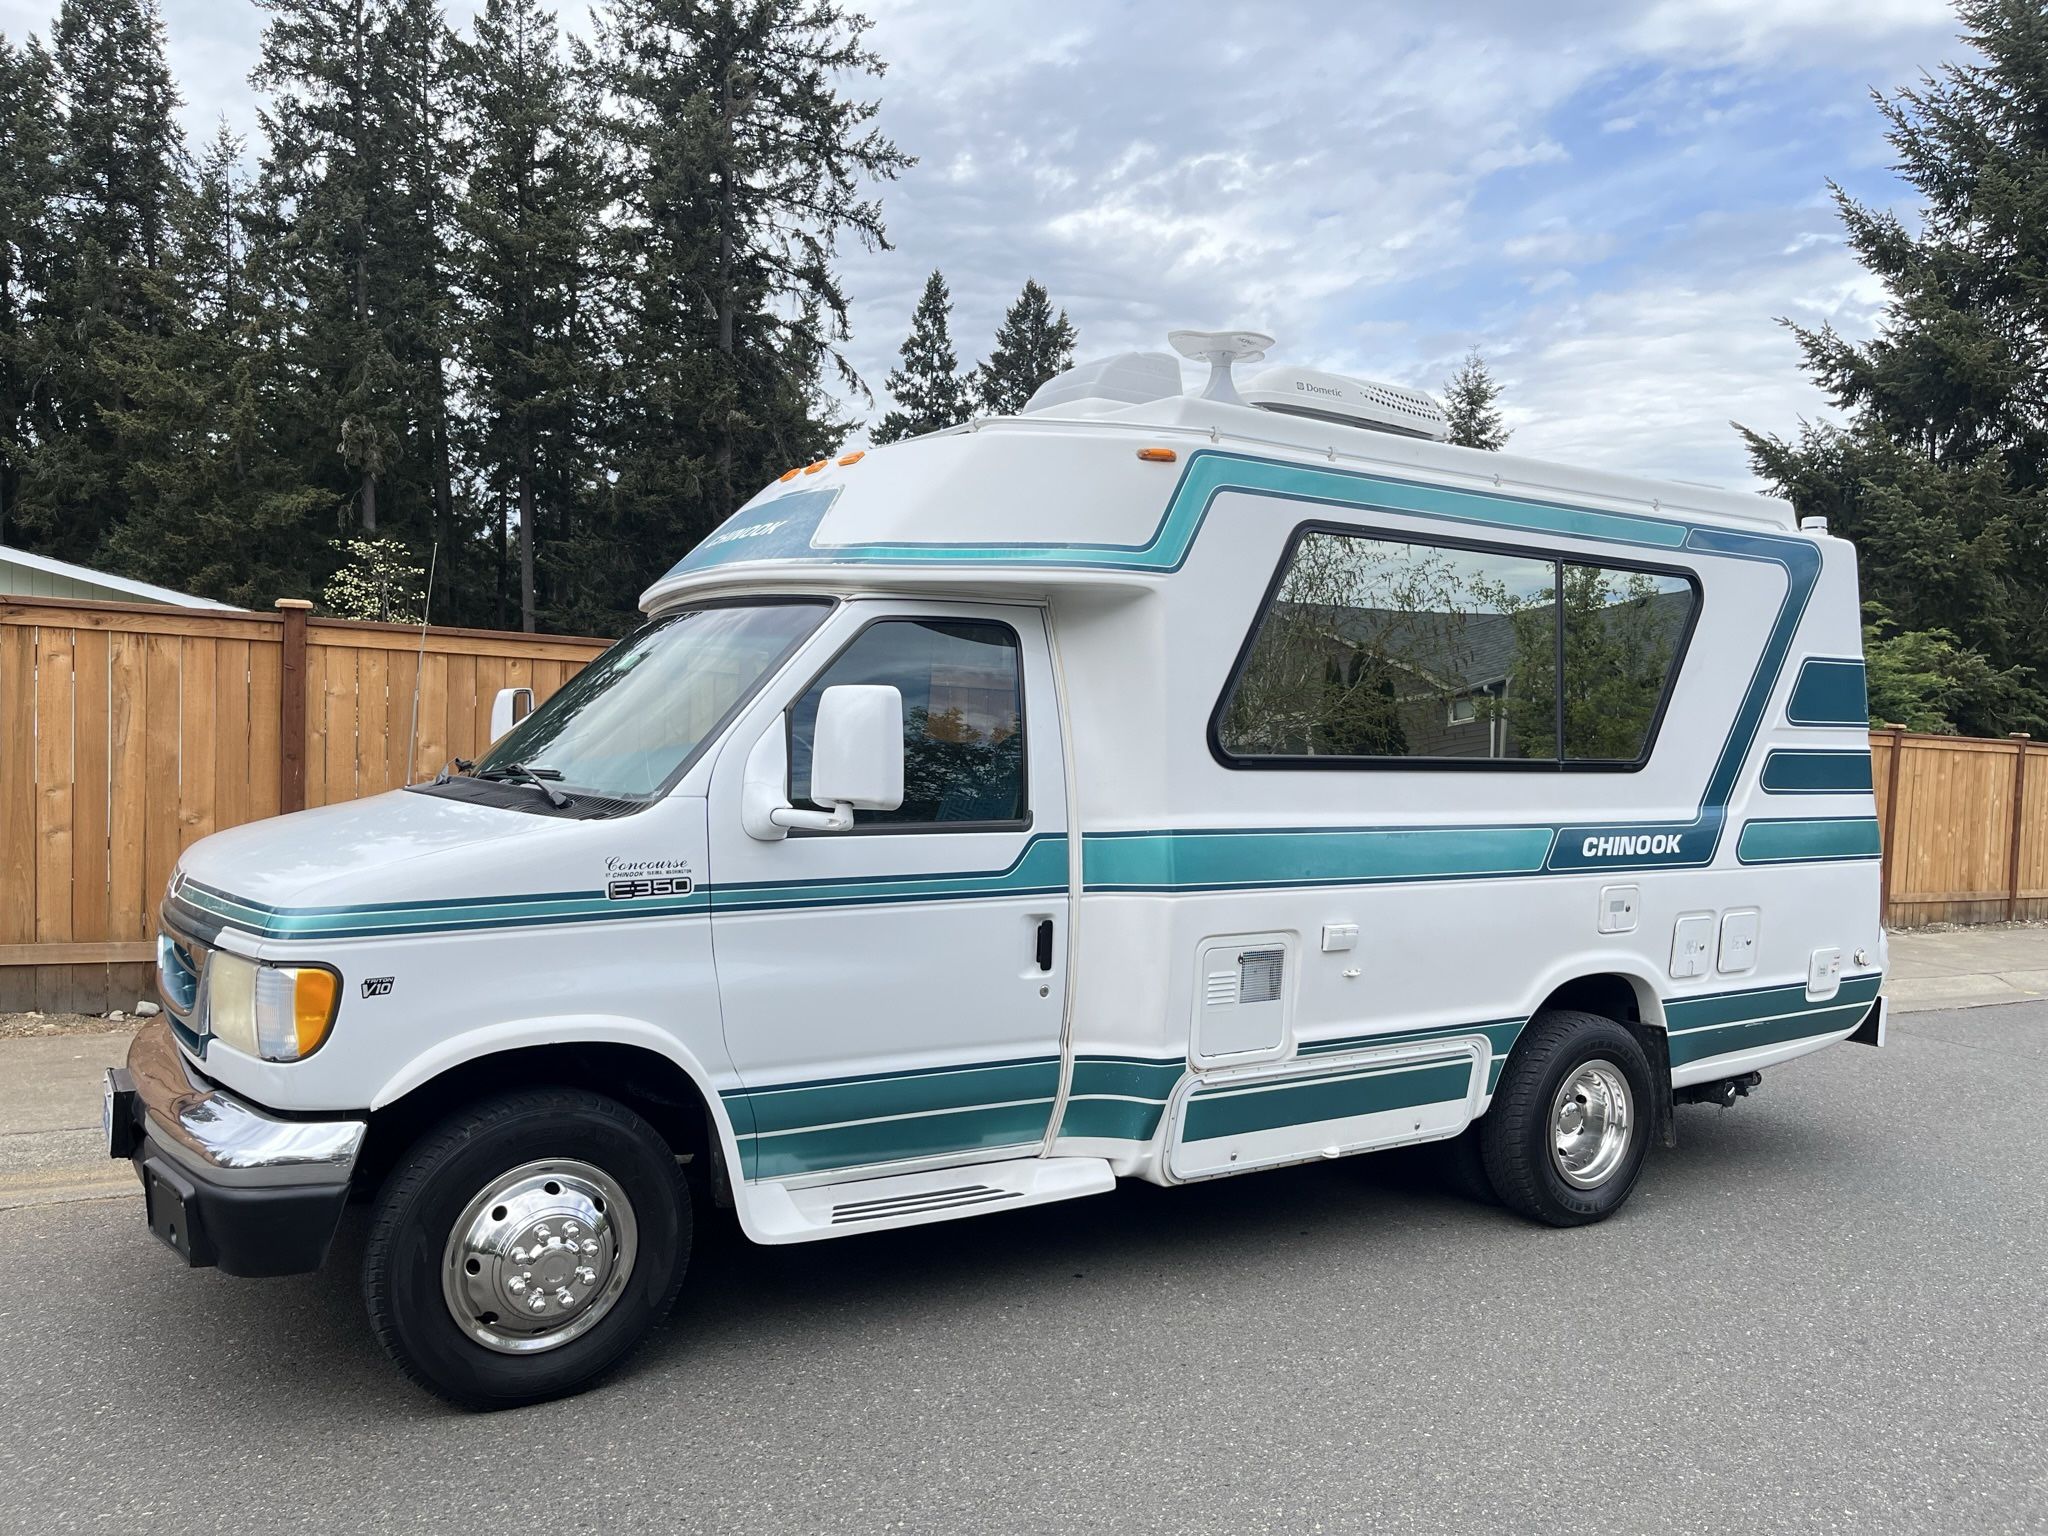 1998 21’ Chinook Concourse Class B Van Great Deal Must See!!!